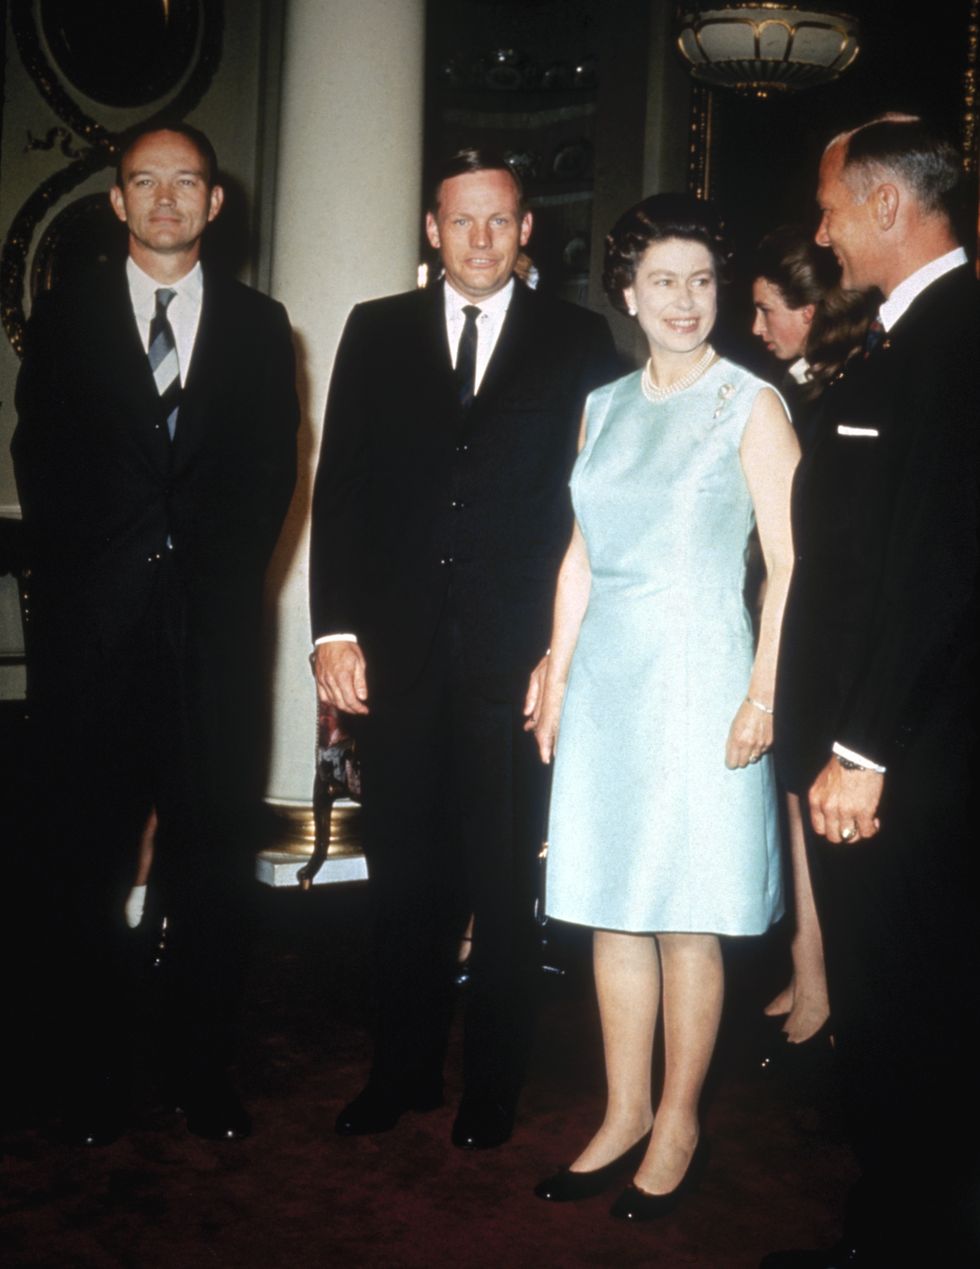 Queen Elizabeth II with the Apollo 11 astronauts Michael Collins, Neil Armstrong, and Edwin "Buzz" Aldrin at Buckingham Palace, 1970. 